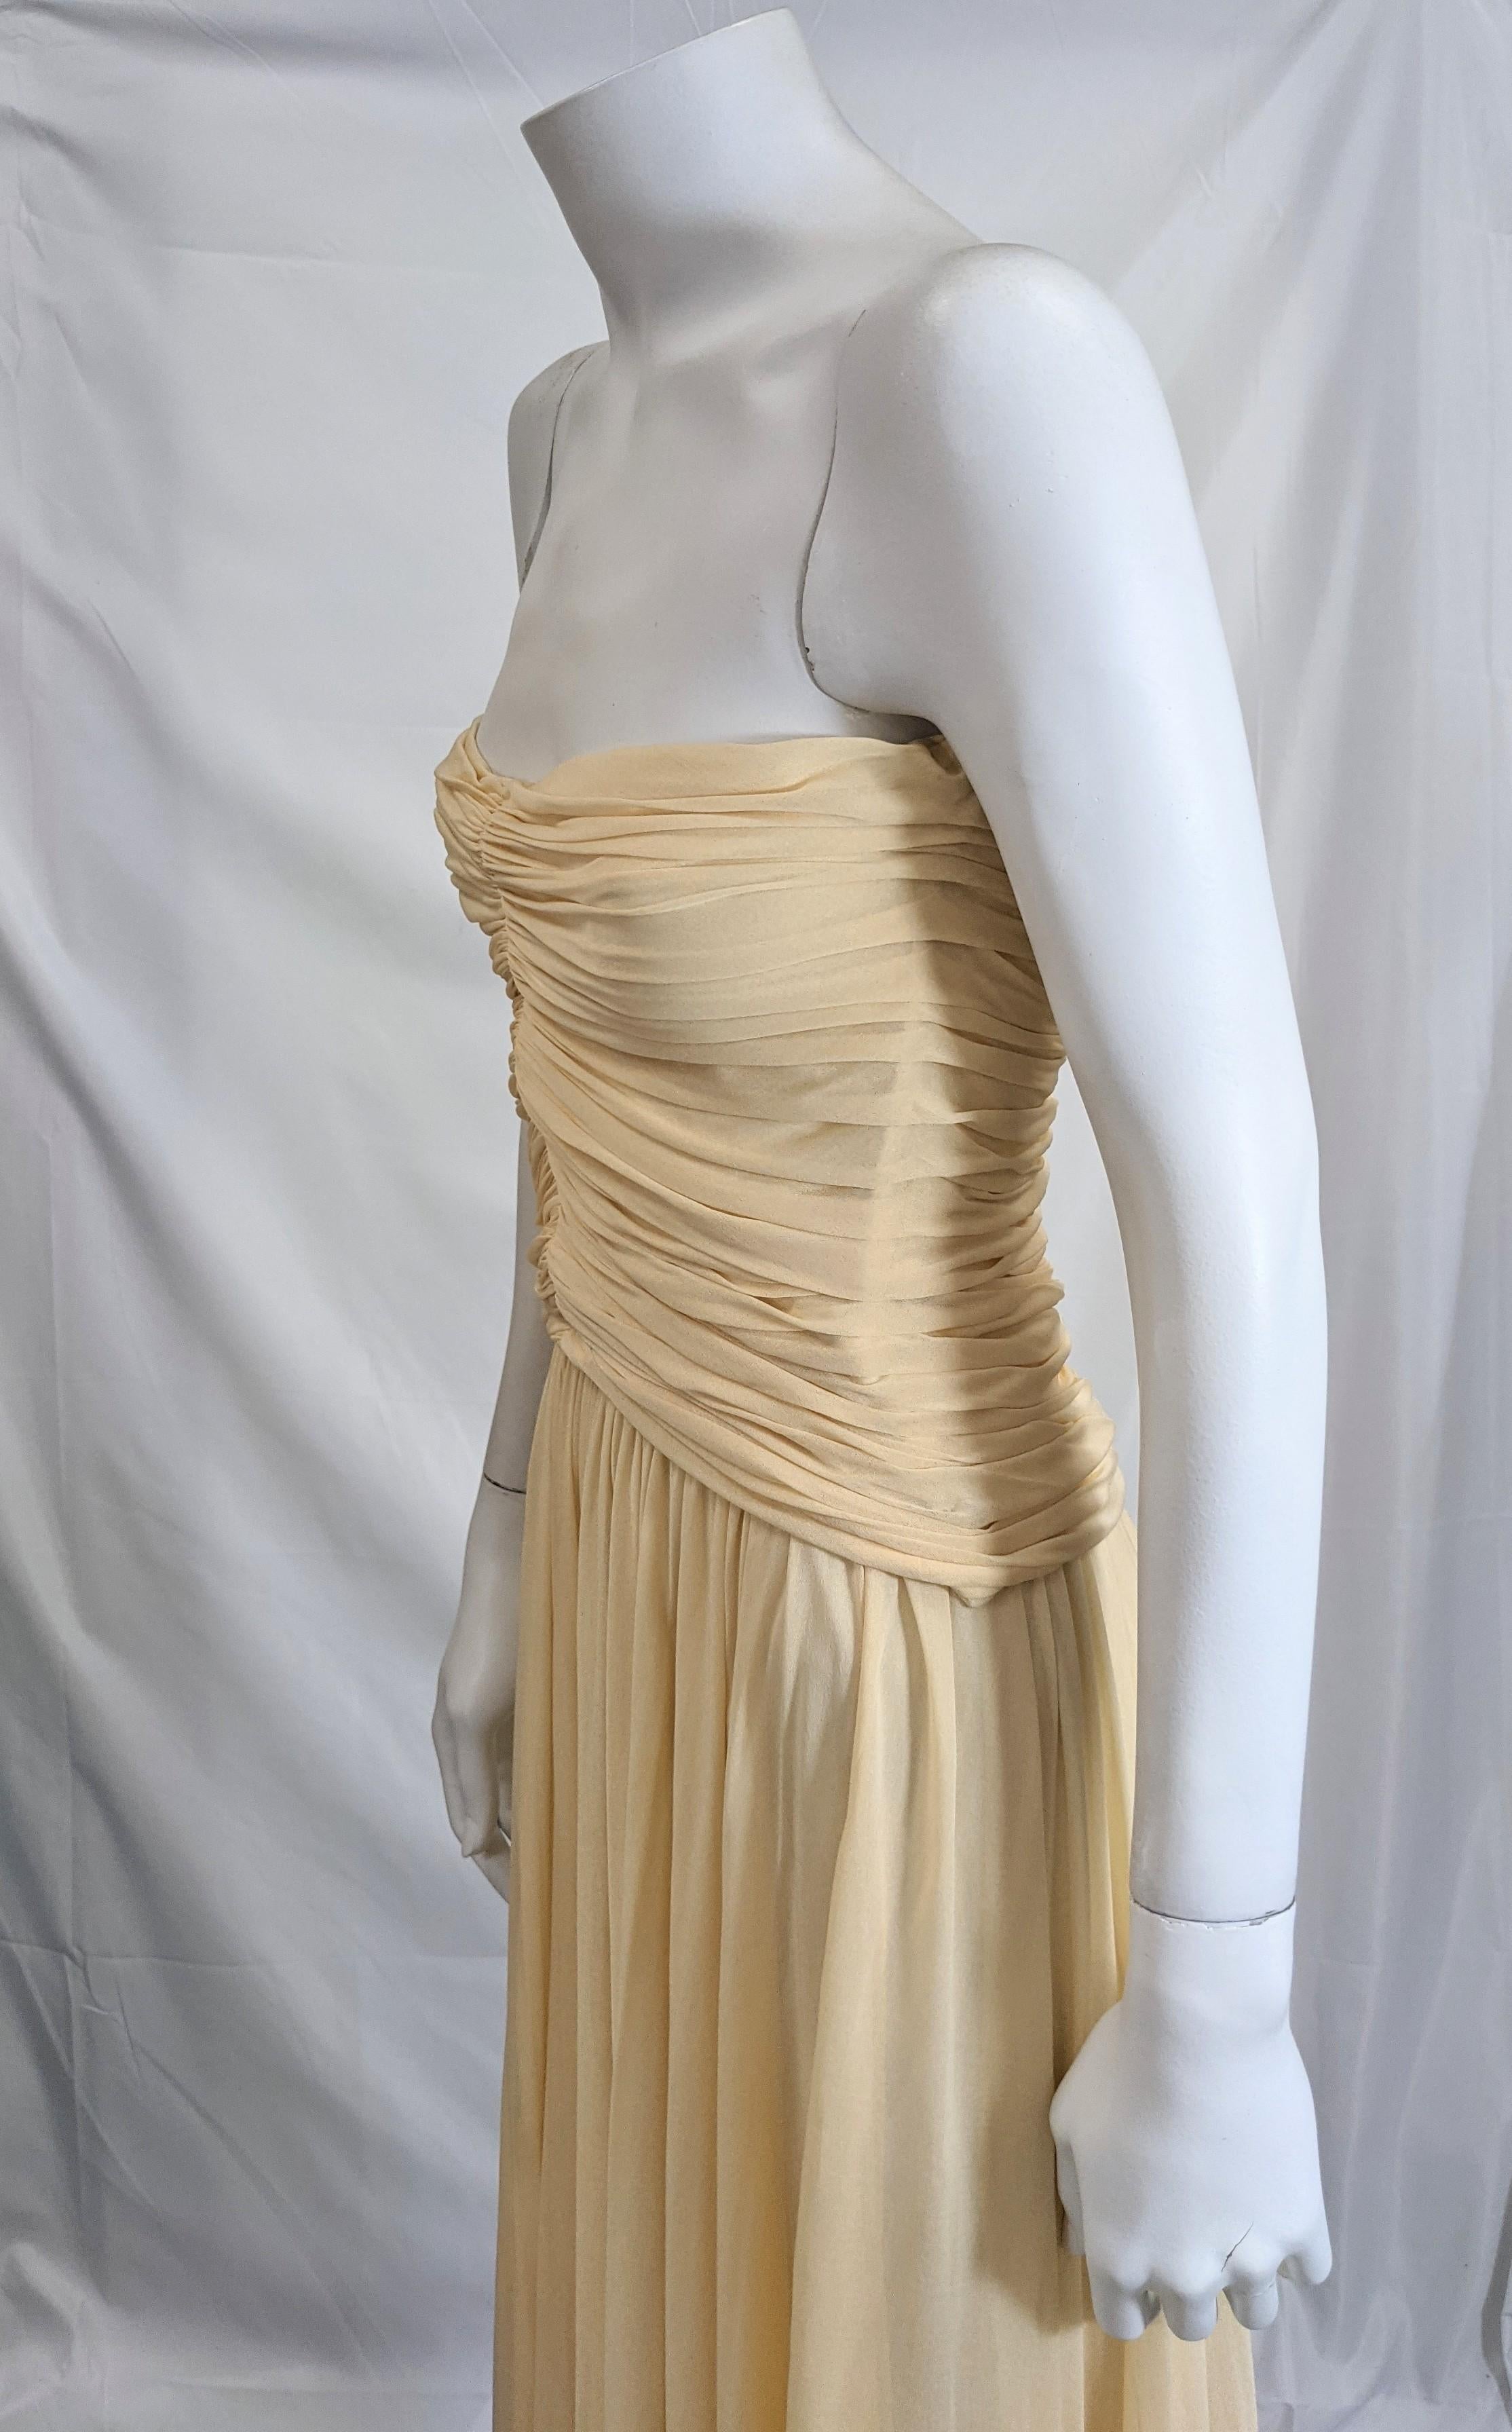 Halston Silk Chiffon Jersey Grecian Goddess Dress In Good Condition For Sale In New York, NY